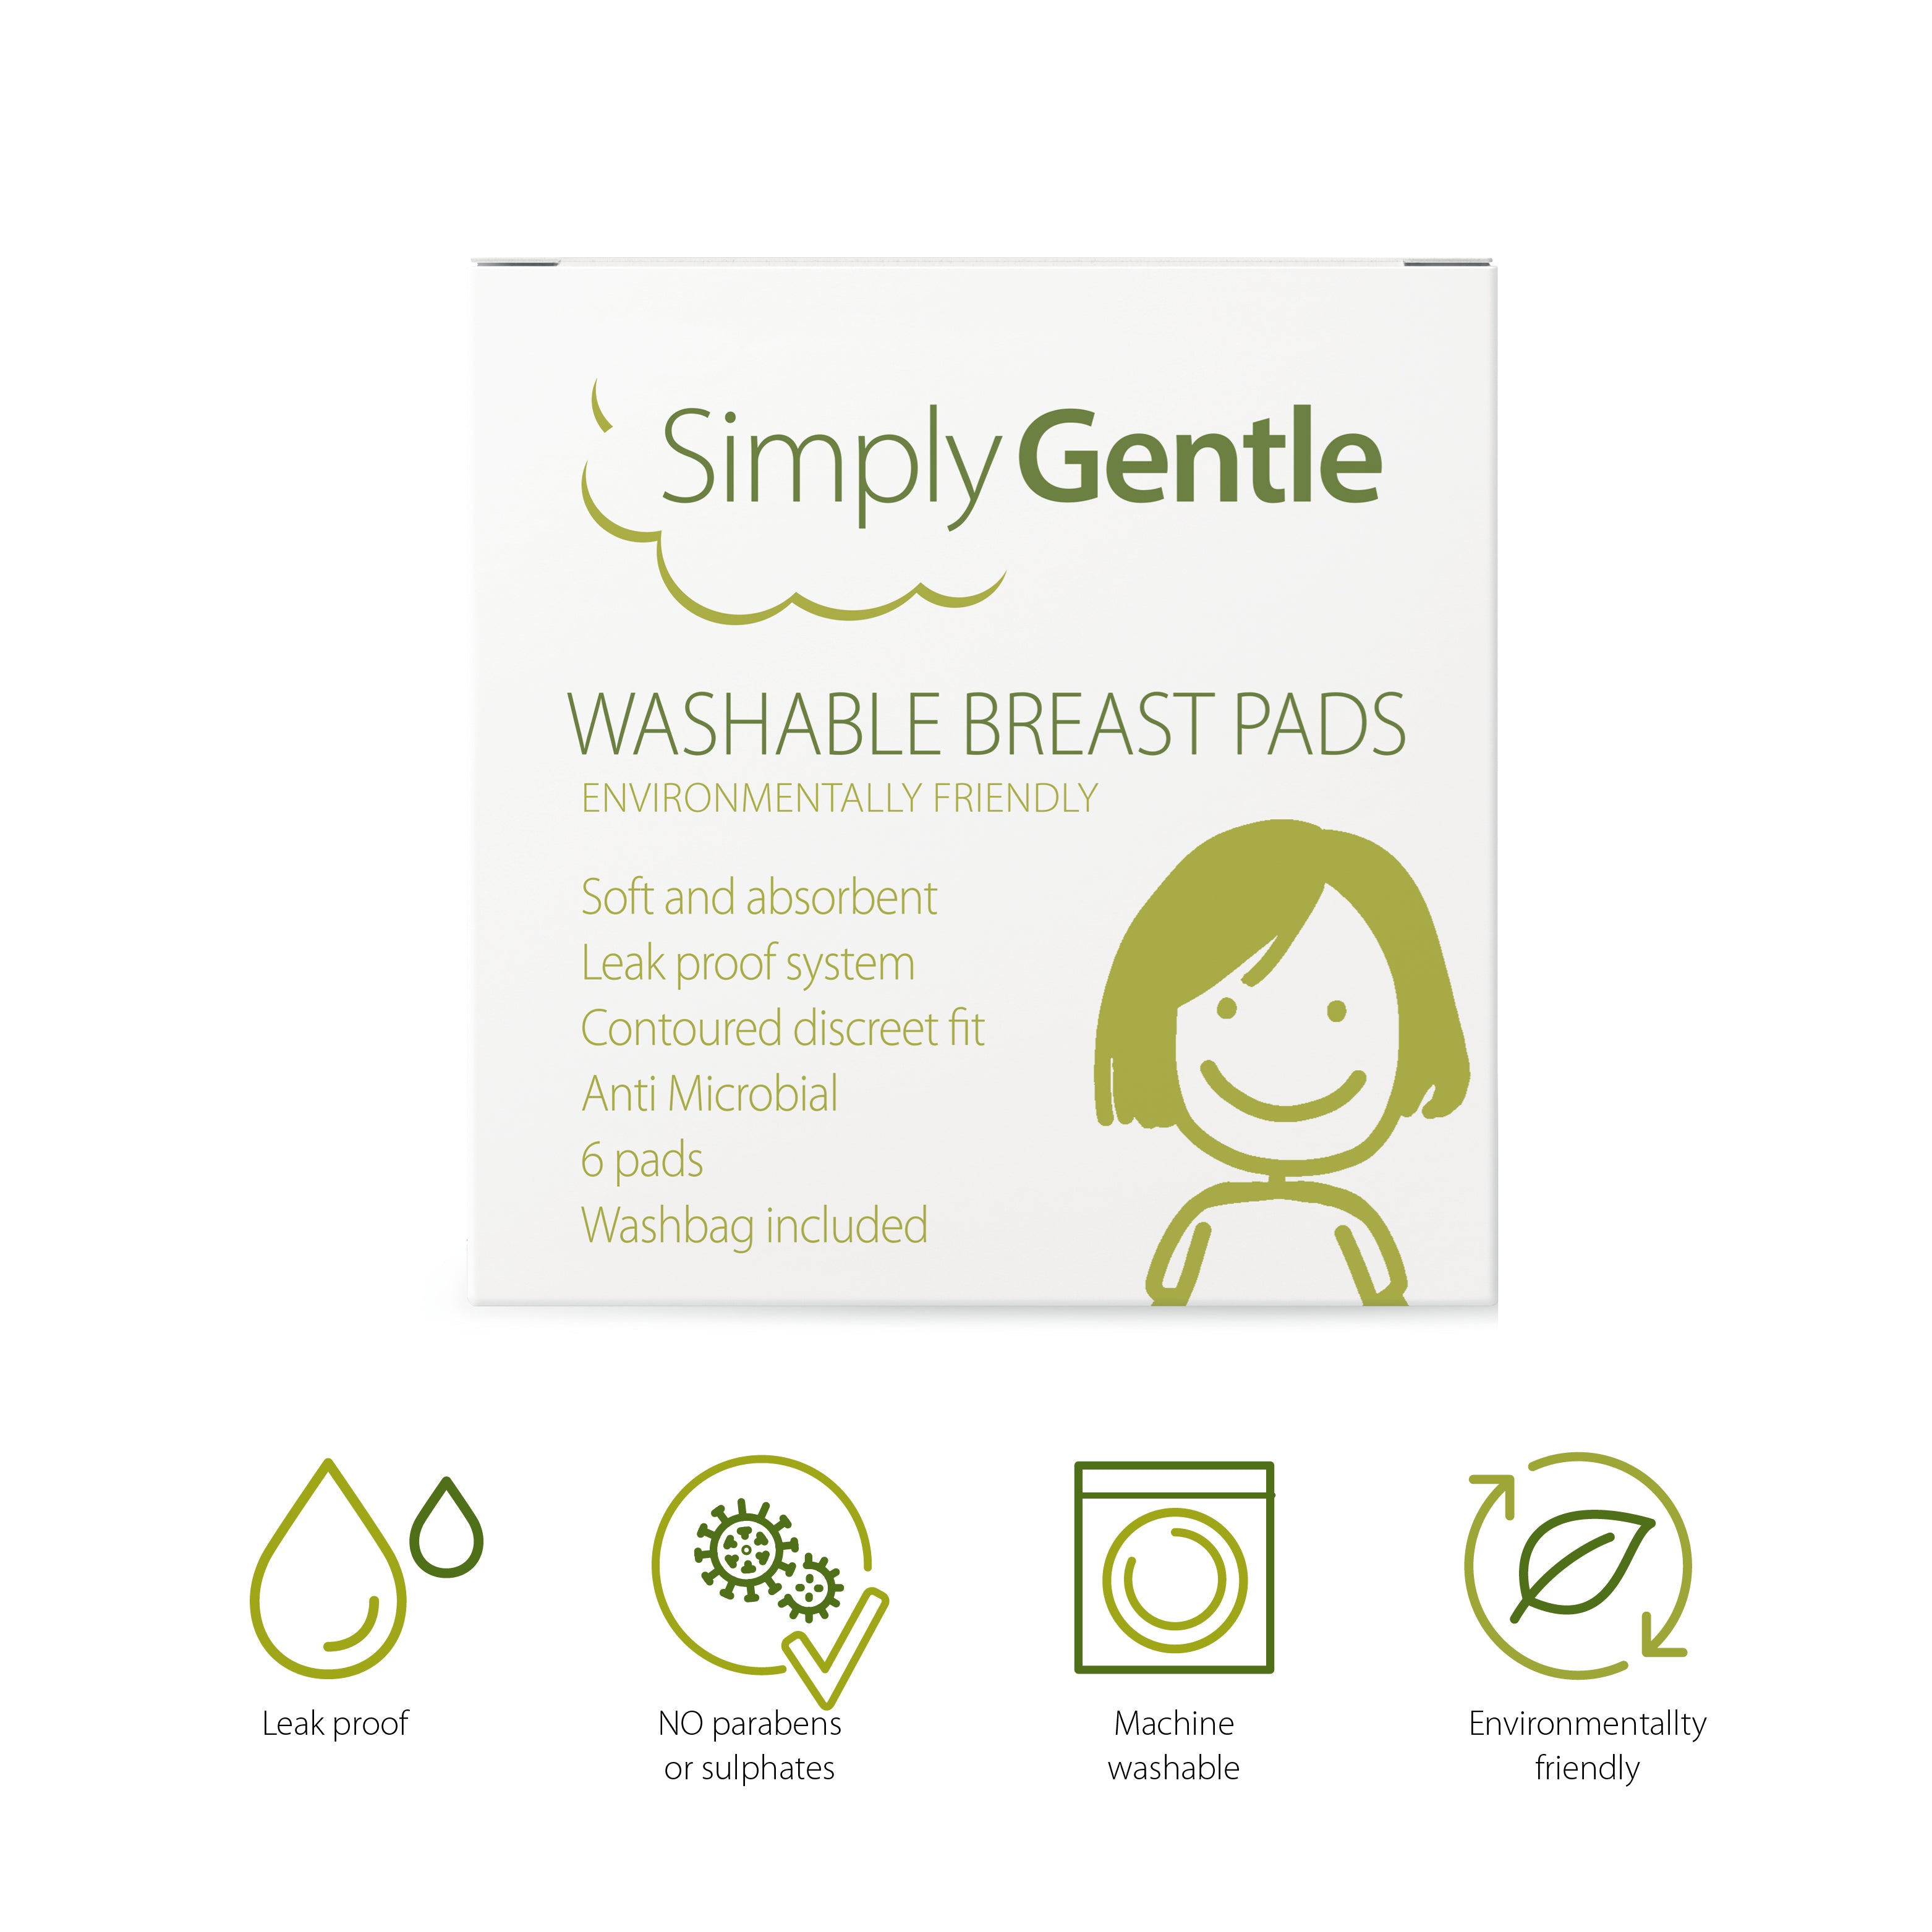  The Simply Gentle Organic Mother & Baby skincare range has been developed for maximum comfort and protection for both mothers and infants. Using a combination of natural and organic ingredients, using Simply Gentle’s products means that you are doing more than just looking after yourself and your baby, you are also looking after the environment in which you both grow.